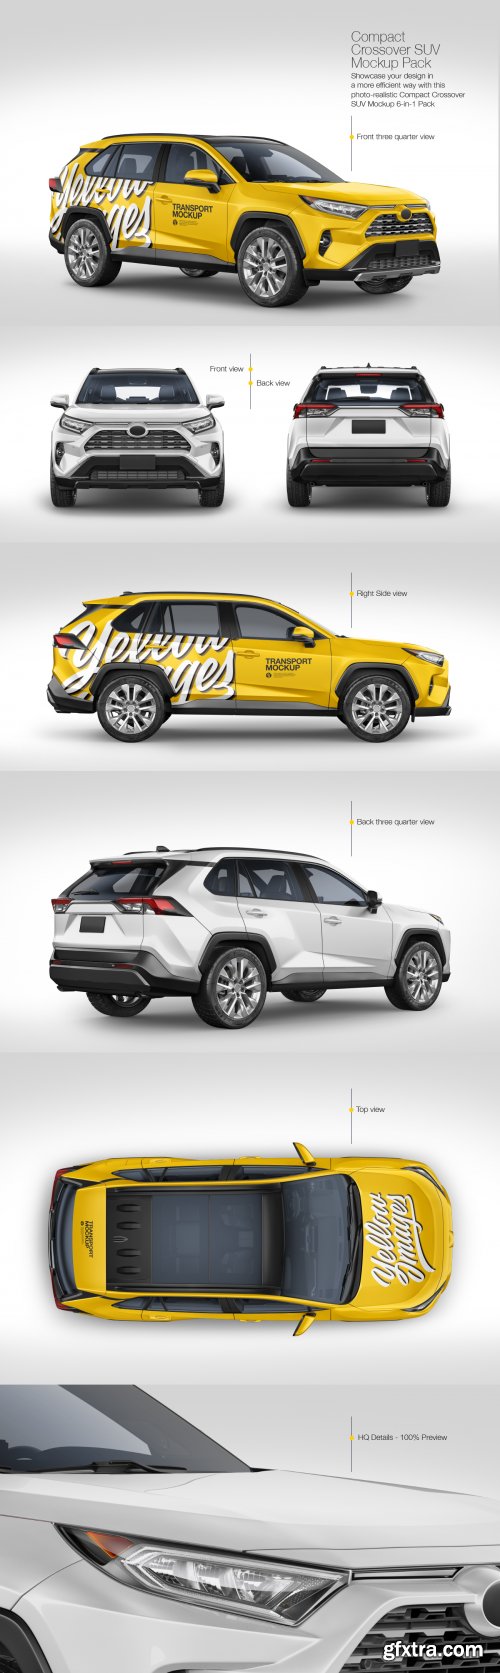 Compact Crossover SUV Mockup Pack